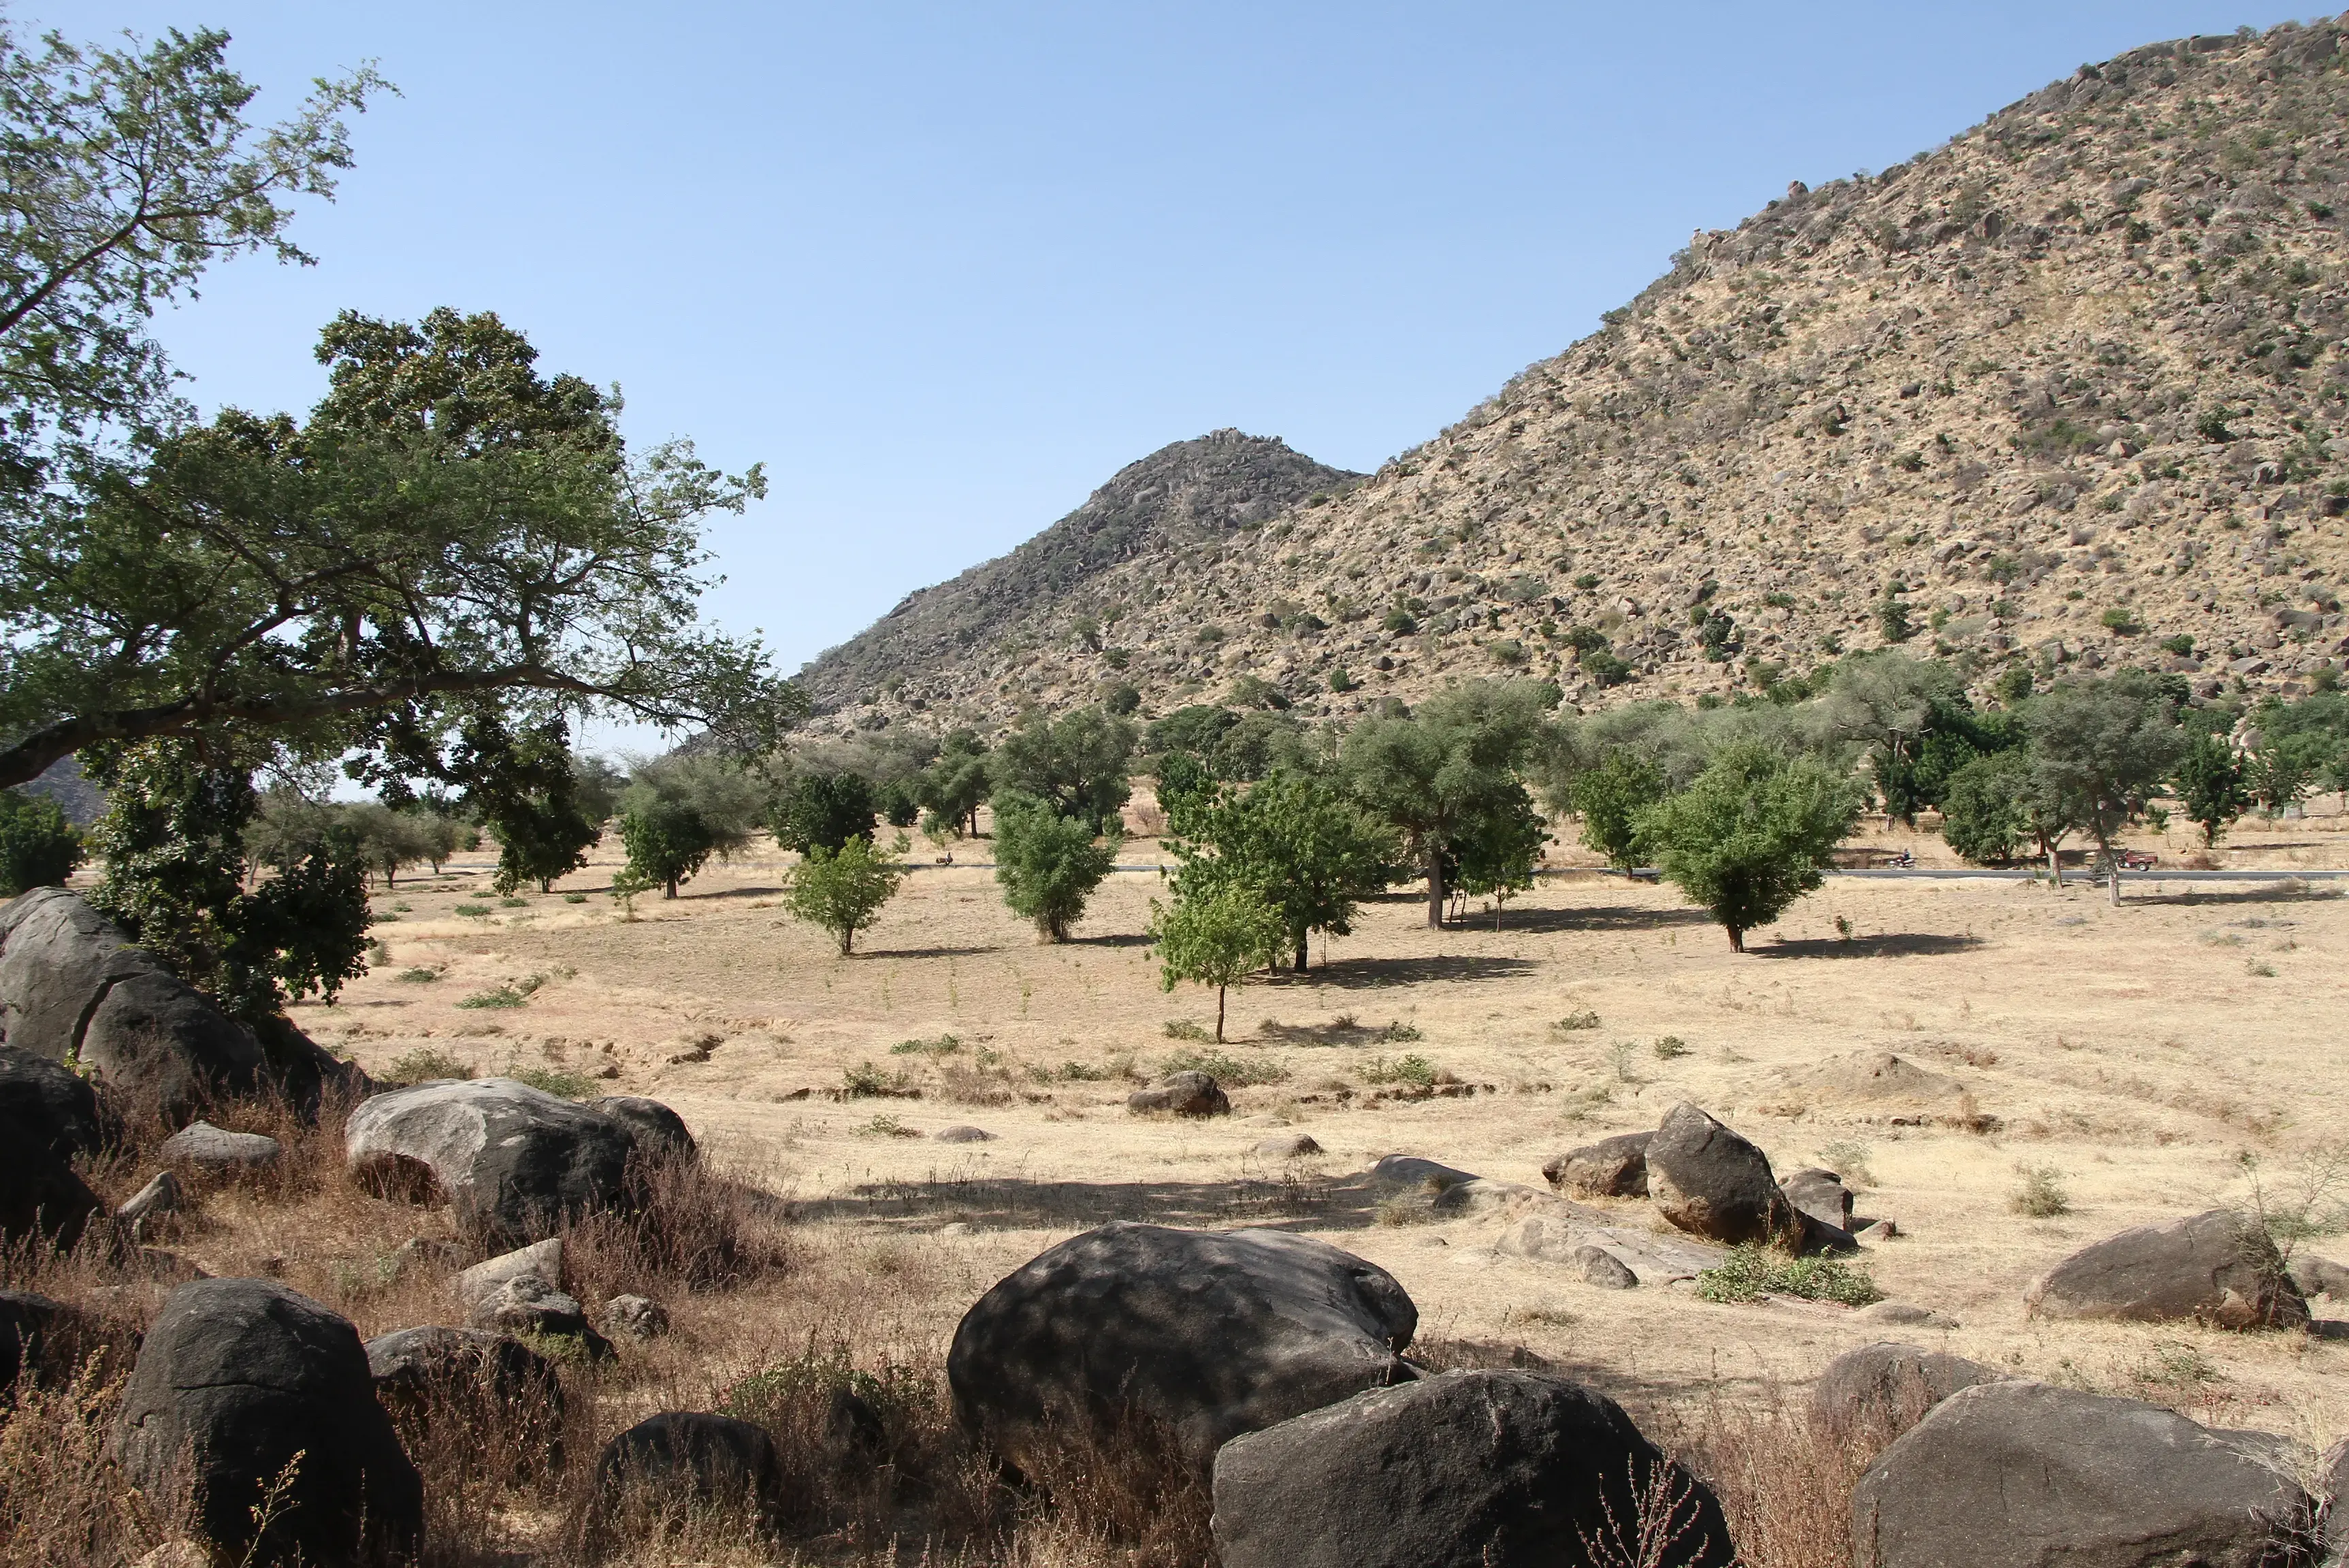 Land degradation affects farmers and herders  that rely on healthy land for their livelihoods.